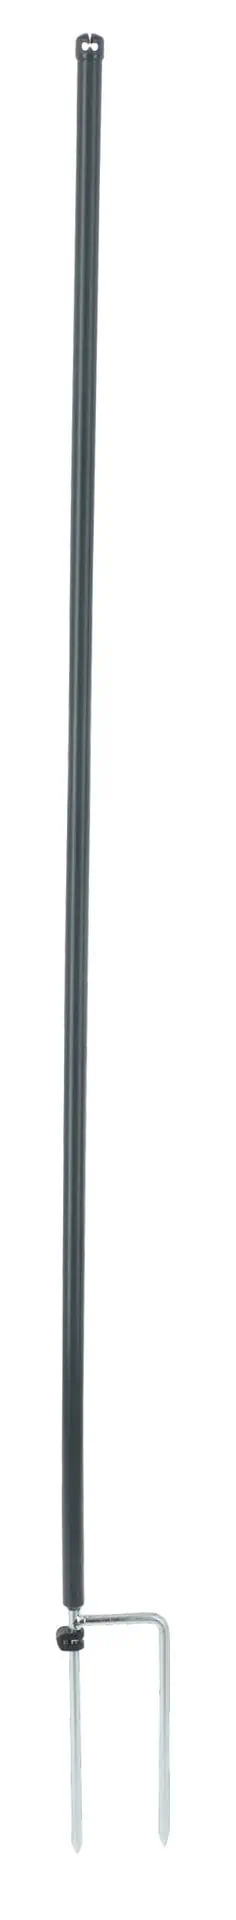 Spare Post grey PA 122 cm - Double Prong